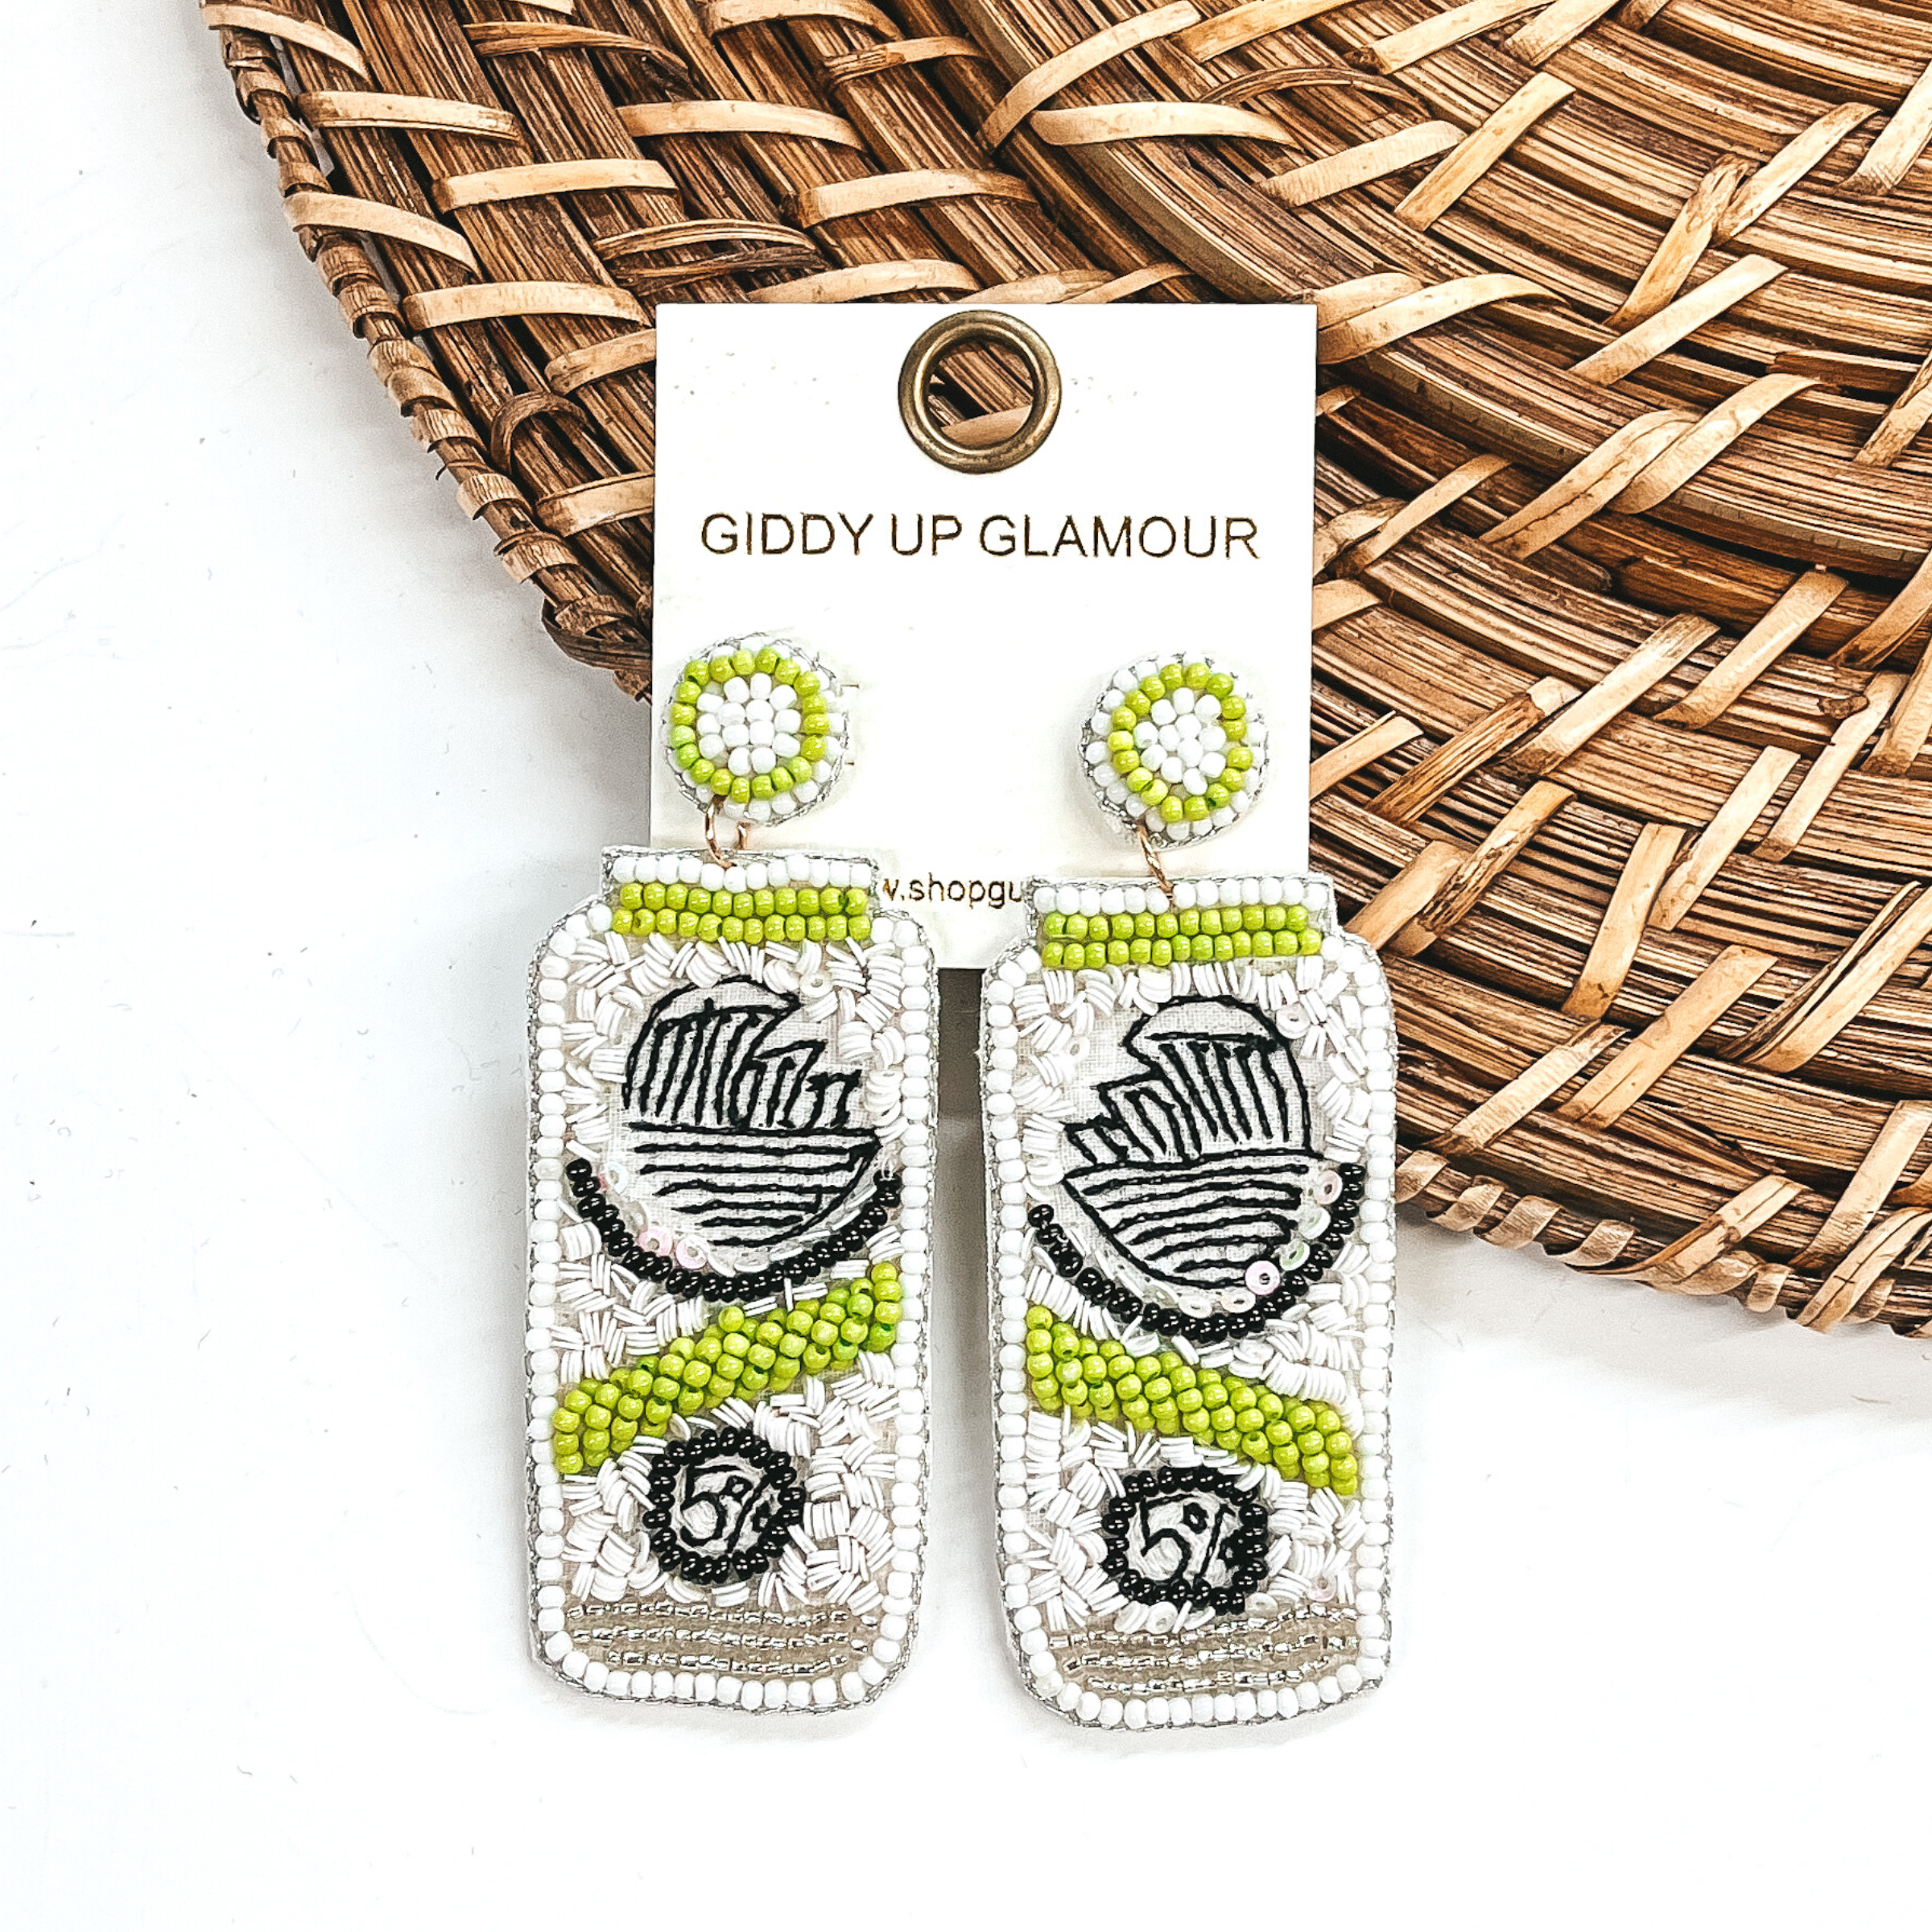 White beaded can earrings with lime green accents that look like White Claw cans. These earrings are pictured laying partially on a basket weave material on a white background. 